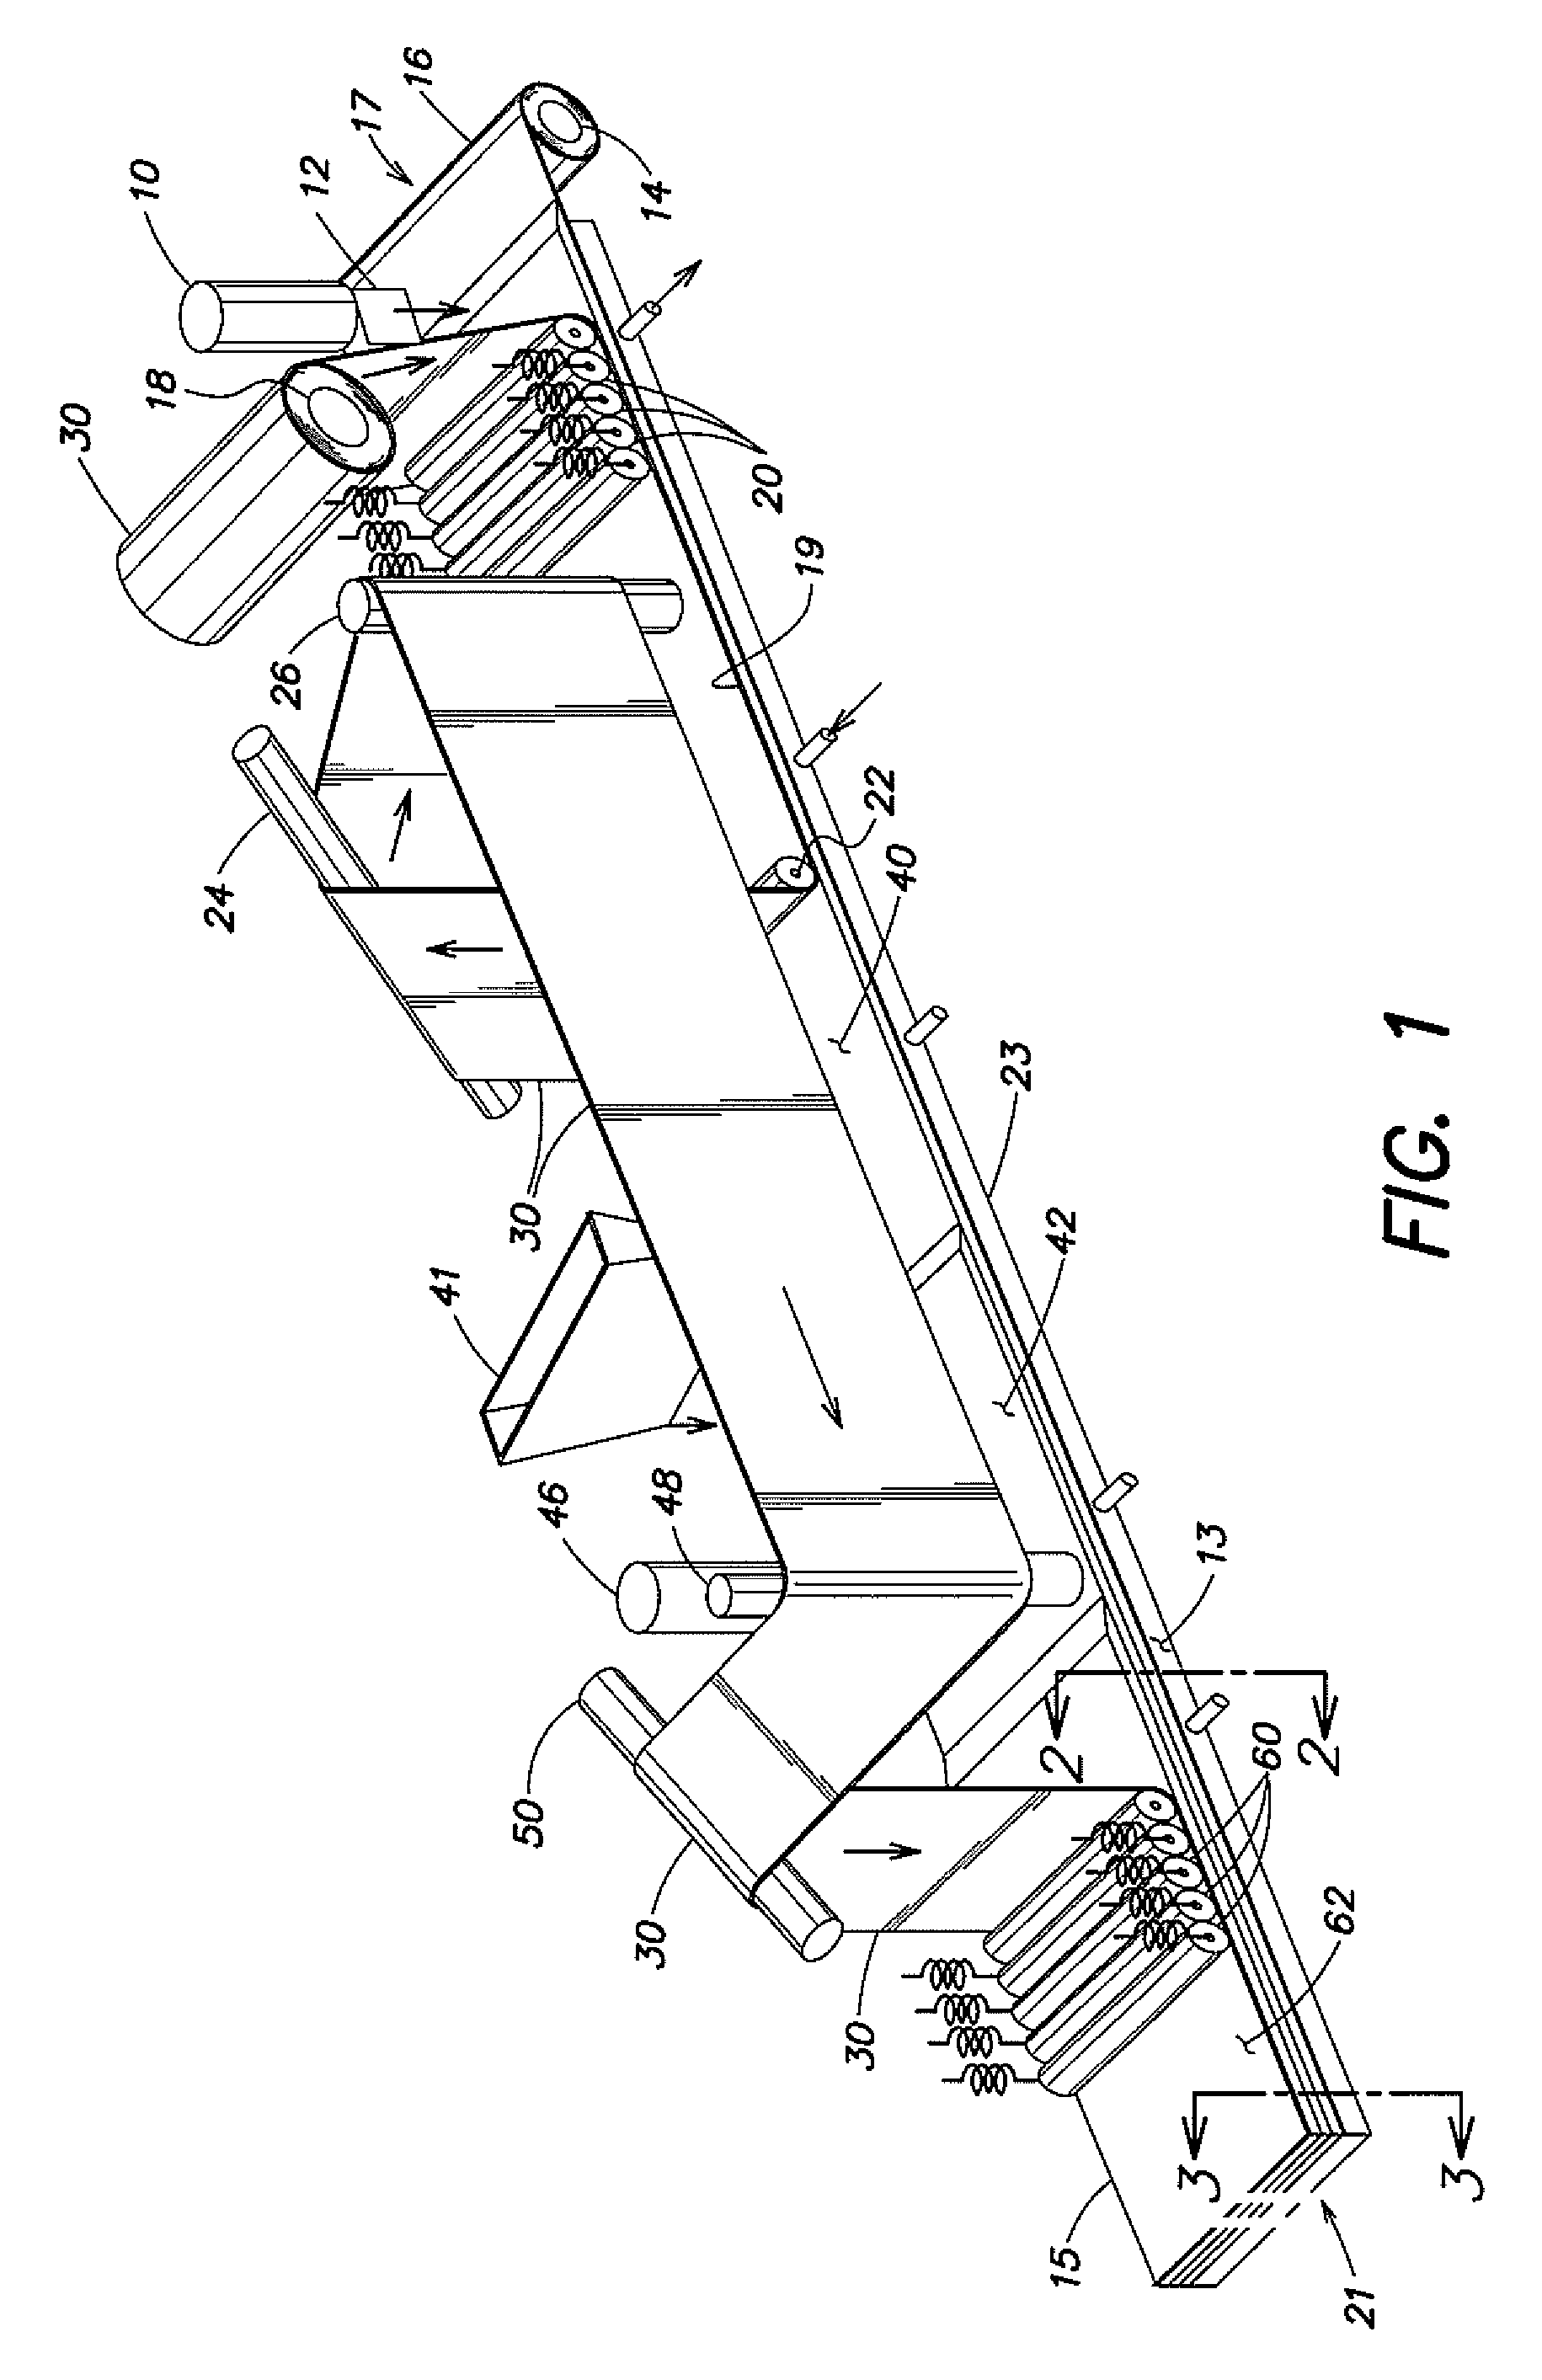 Process for Making Integrated Layered Urethane Products